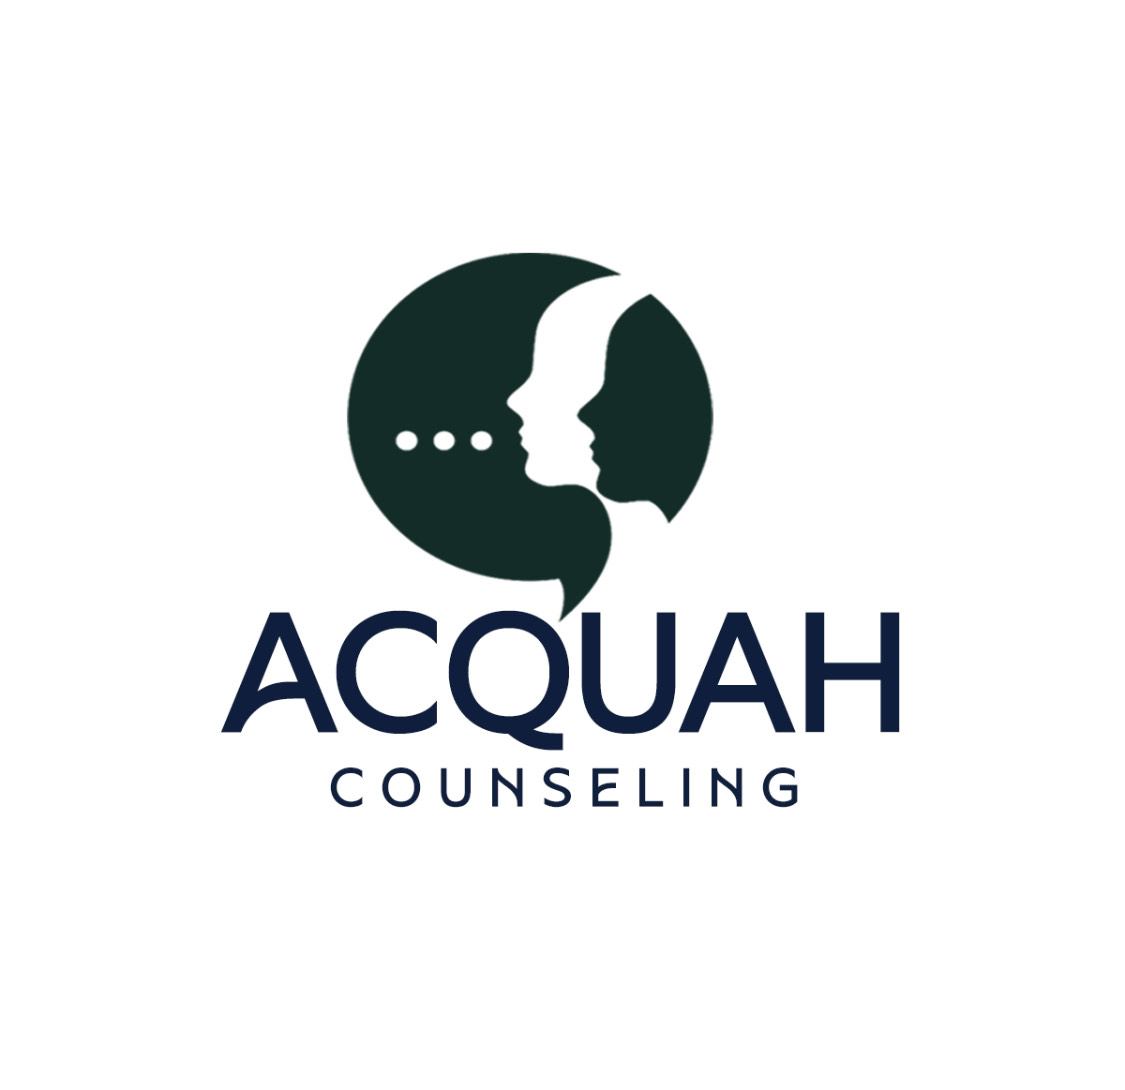 Acquah Counseling